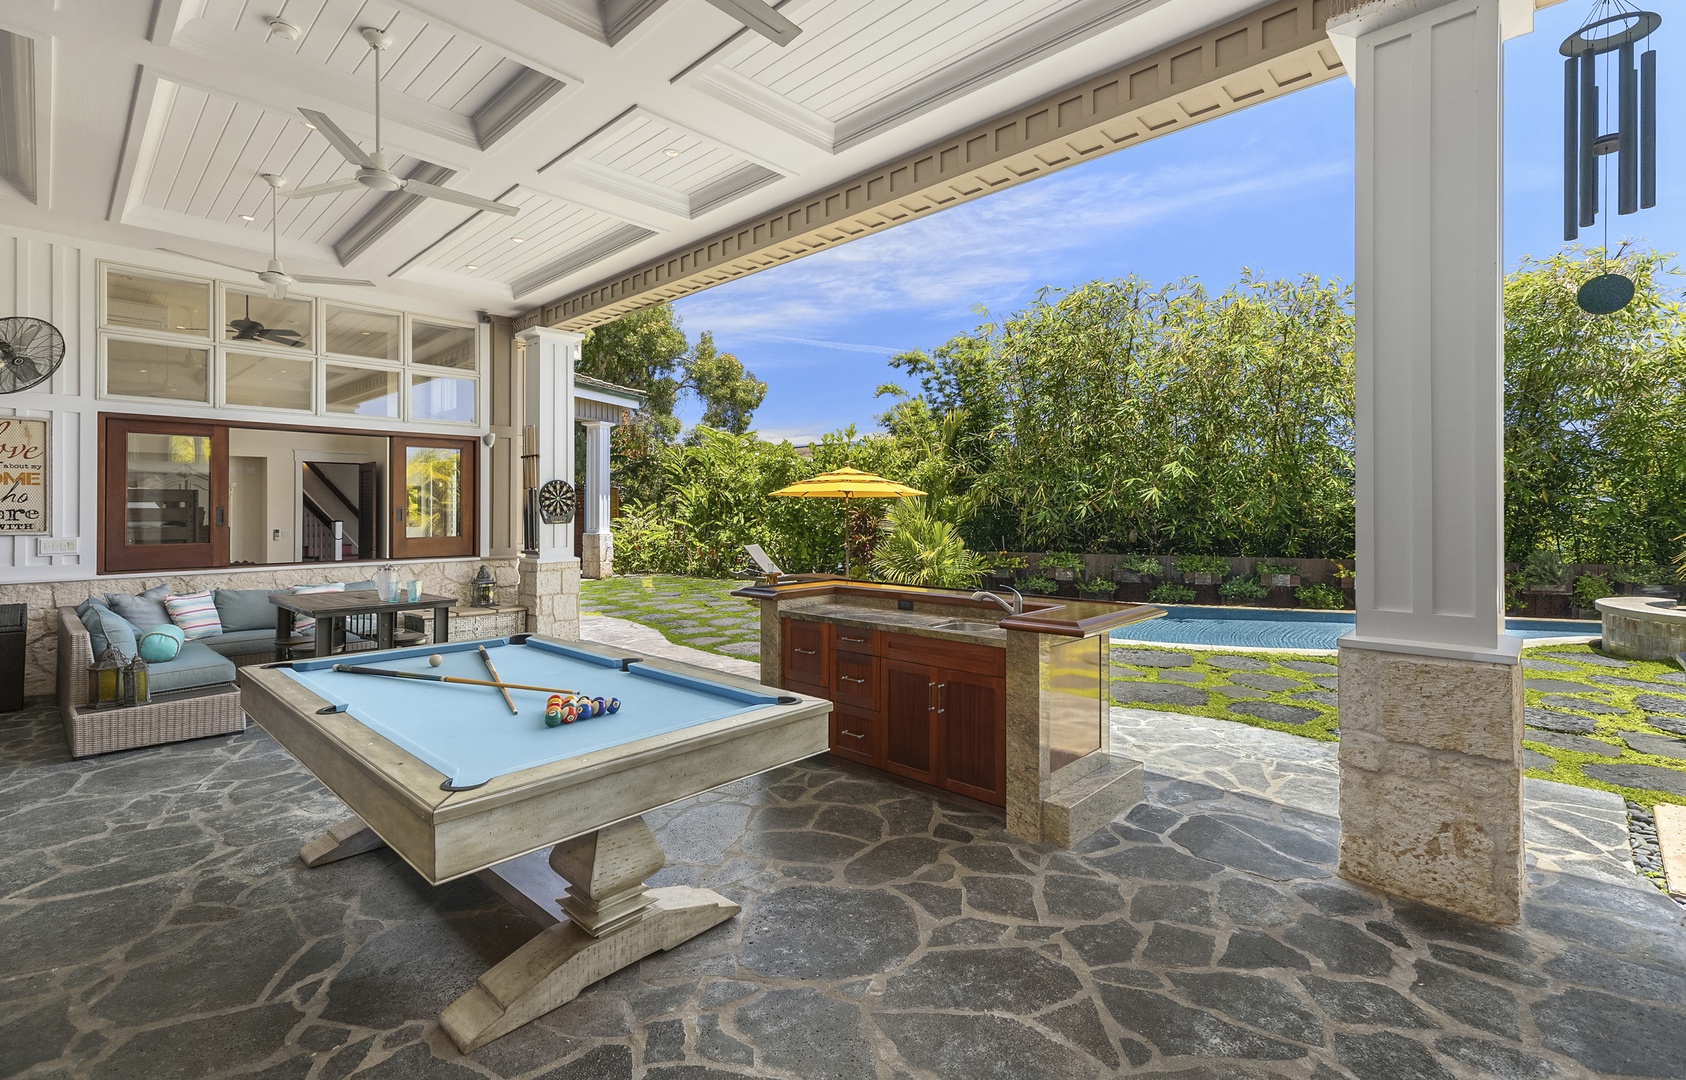 Kailua Vacation Rentals, Lanikai Villa - Challenge family and friends to a round of billiards in the game room that opens to the pool